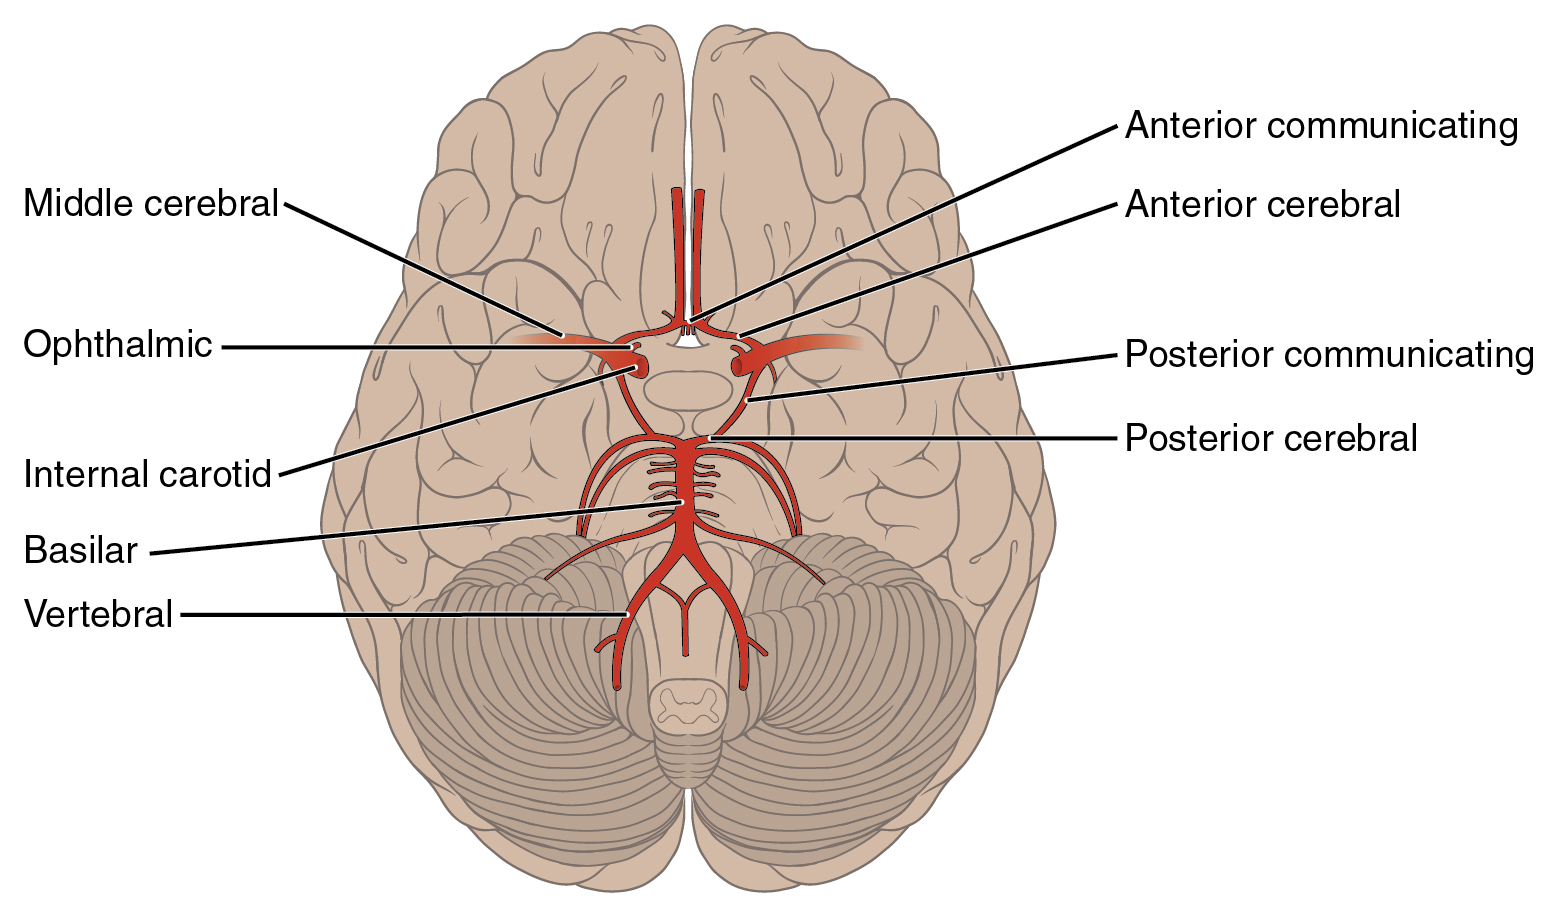 This diagram shows the arteries of the brain.